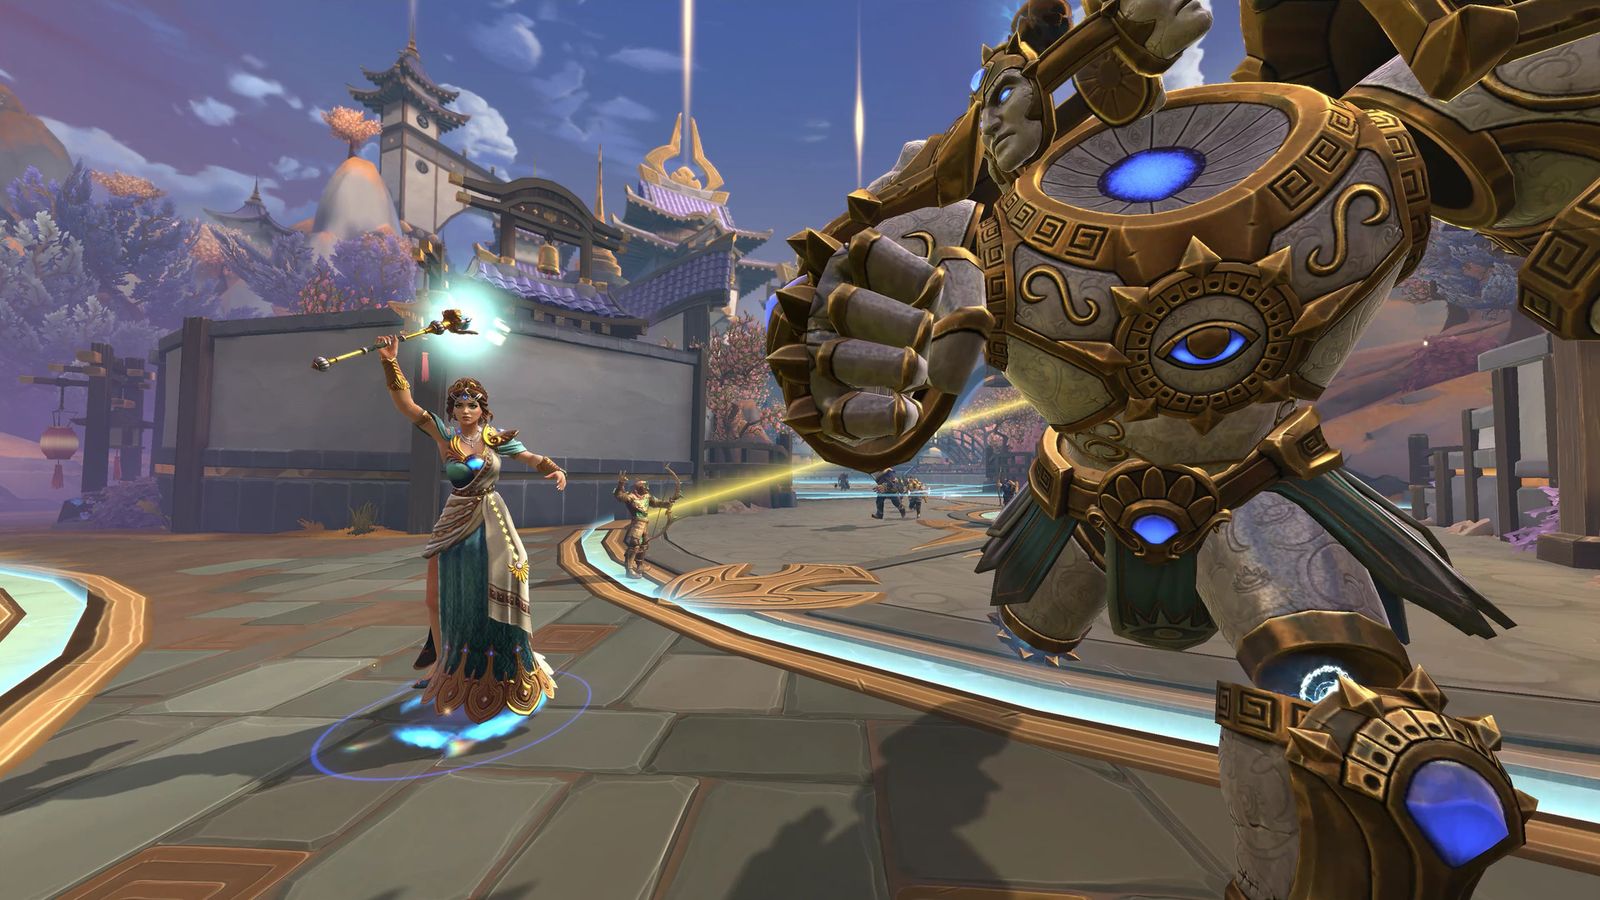 Image of a goddess preparing her special move in Smite